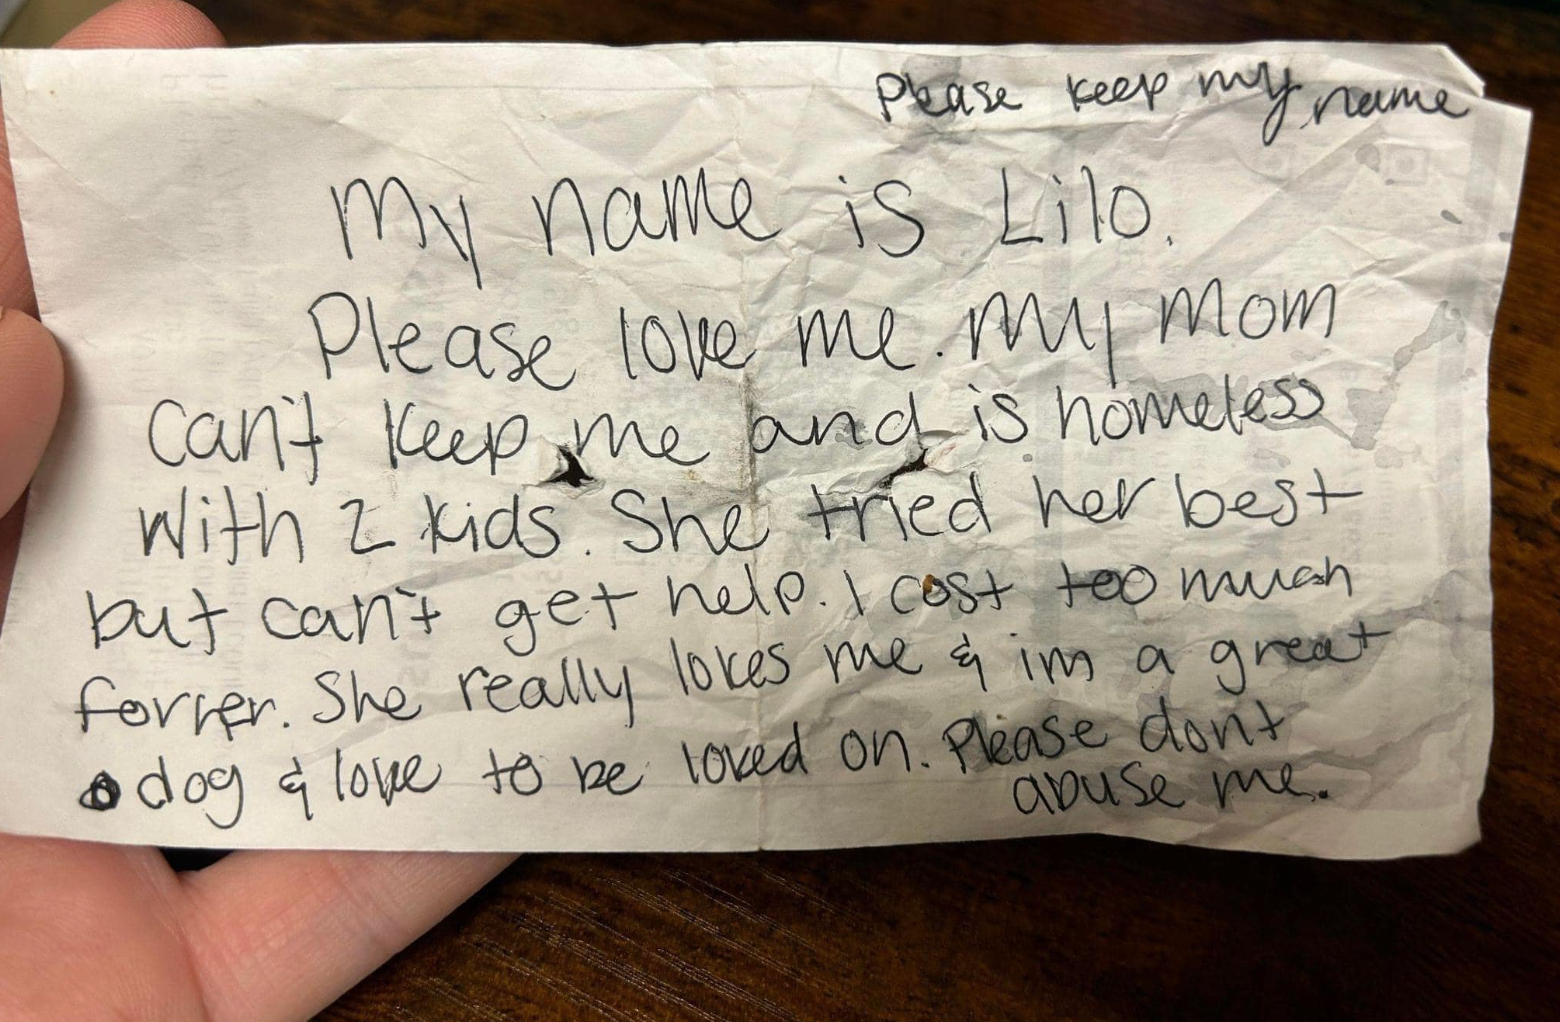 Staff at the McKamey Animal Center in Chattanooga, Tennessee, were moved when they rescued a dog with a heartbreaking note attached to its collar